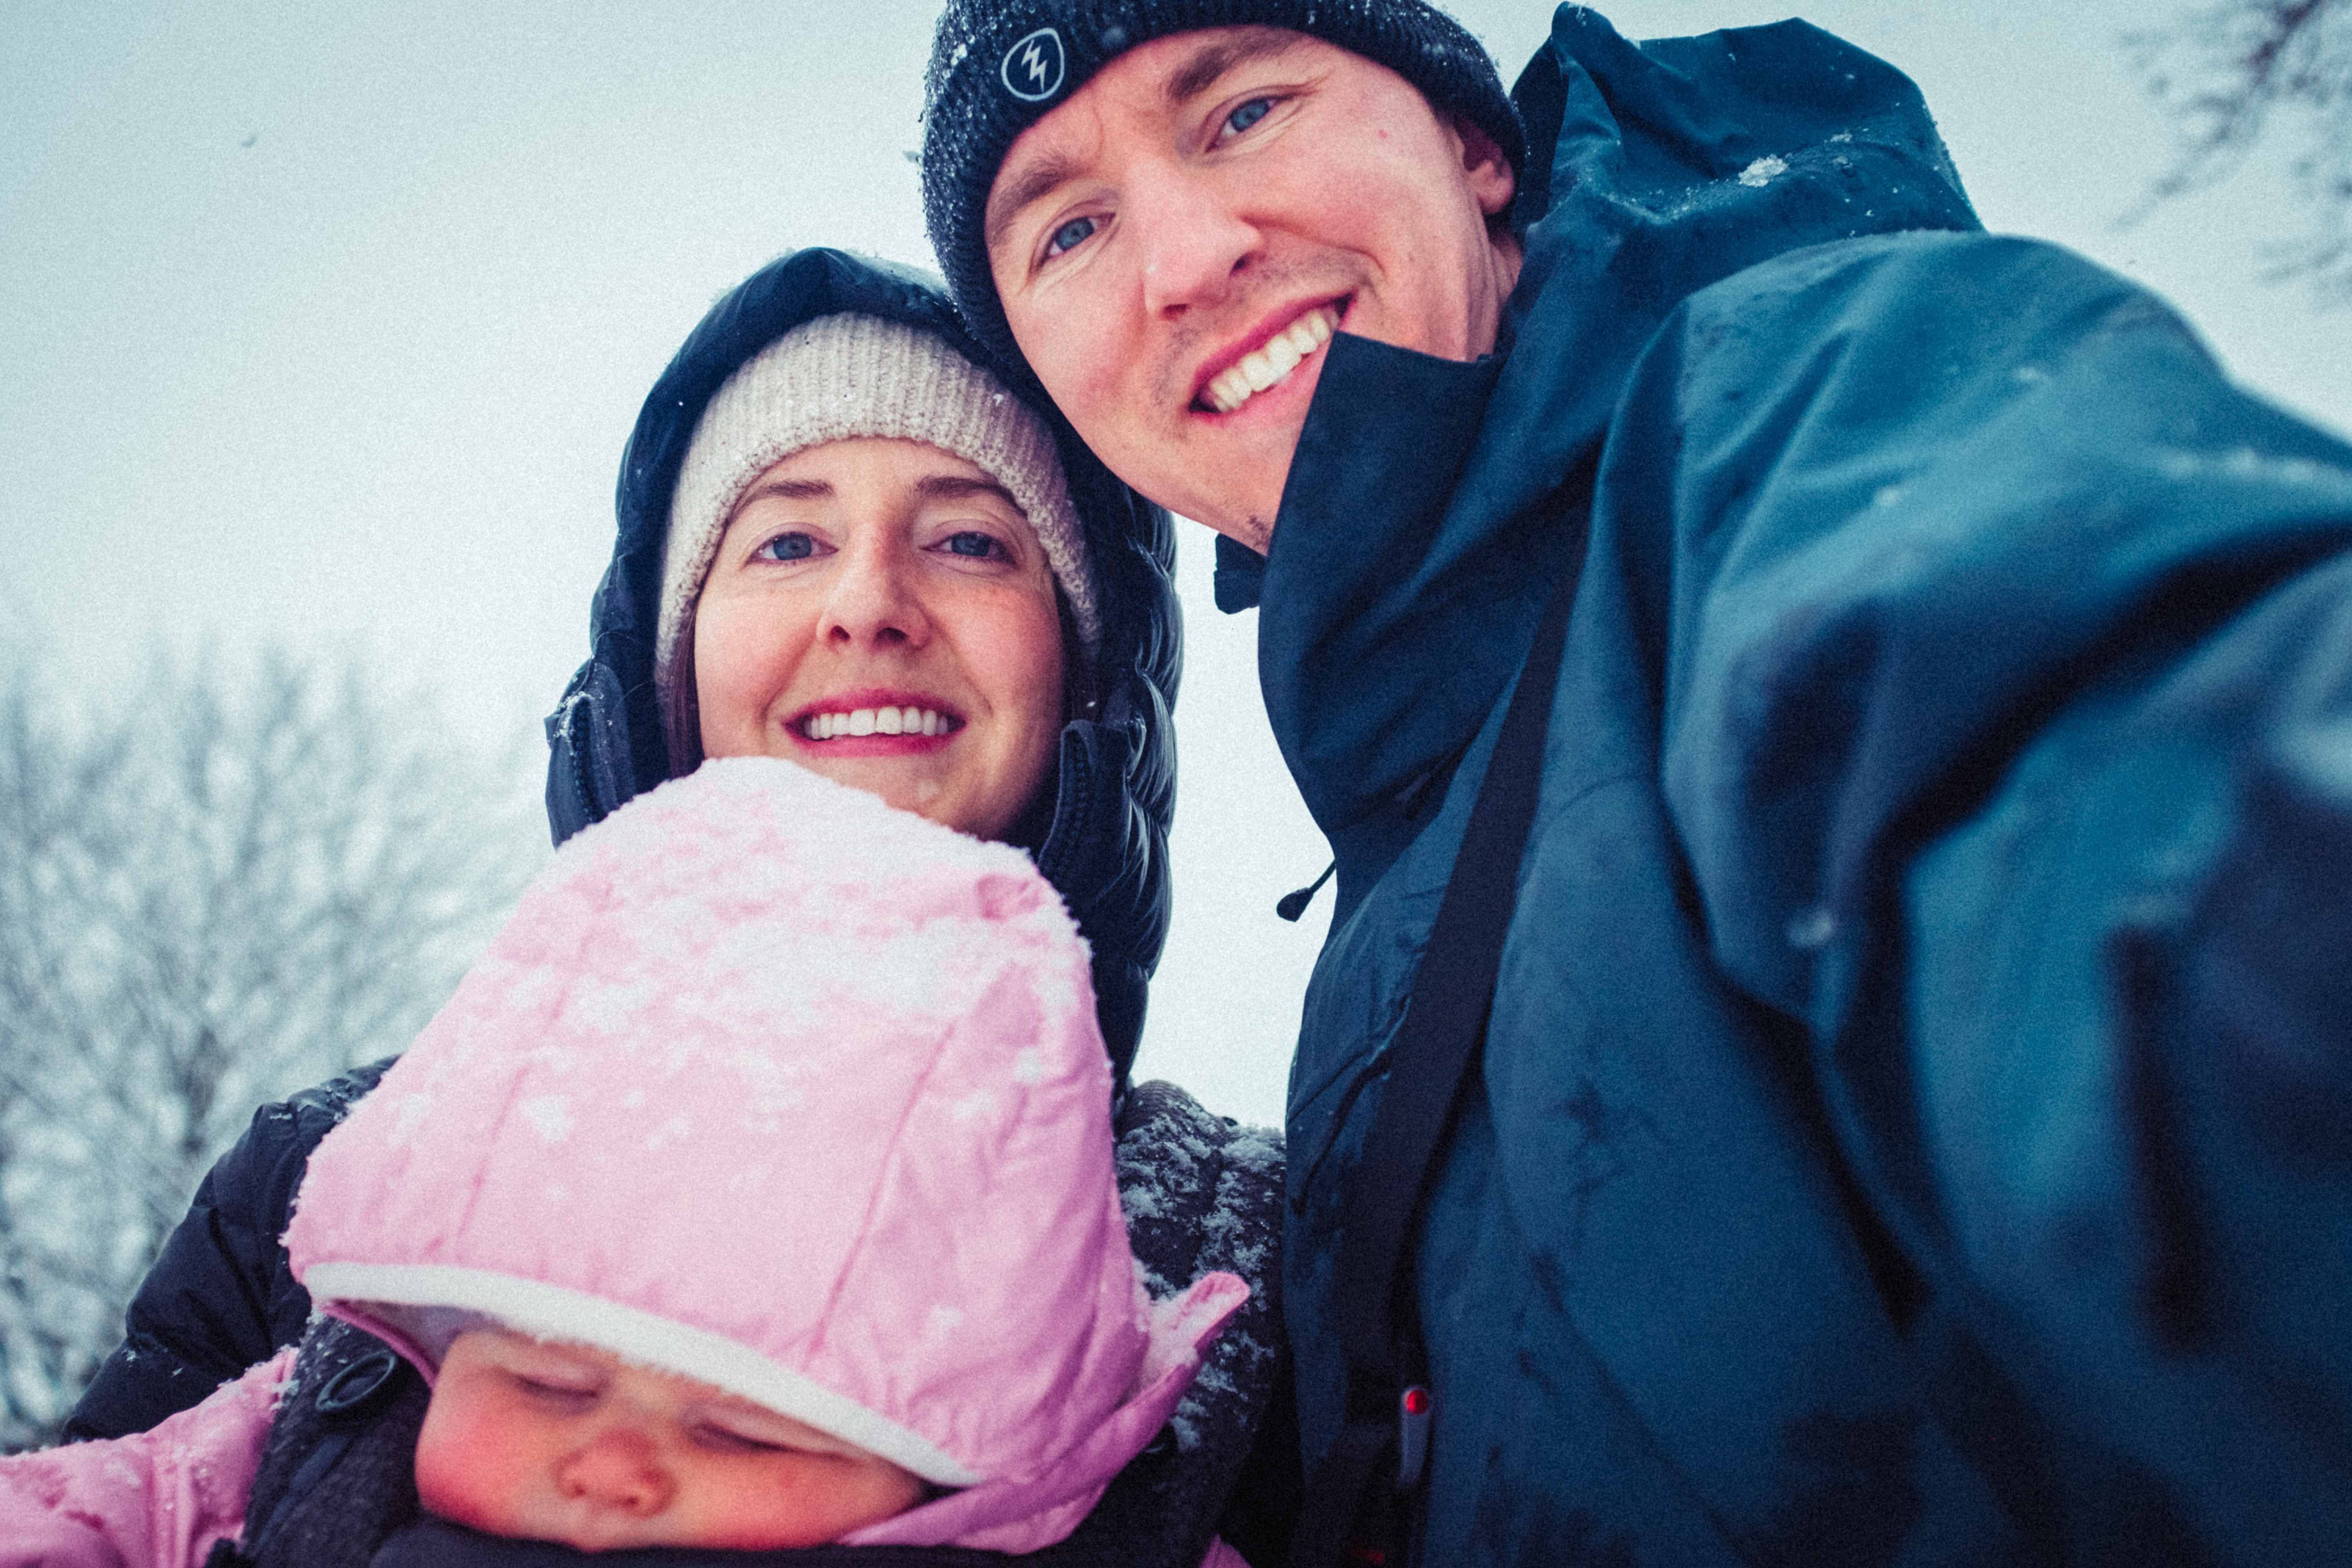 Cameron Husain is pictured with his family on a snowy day.